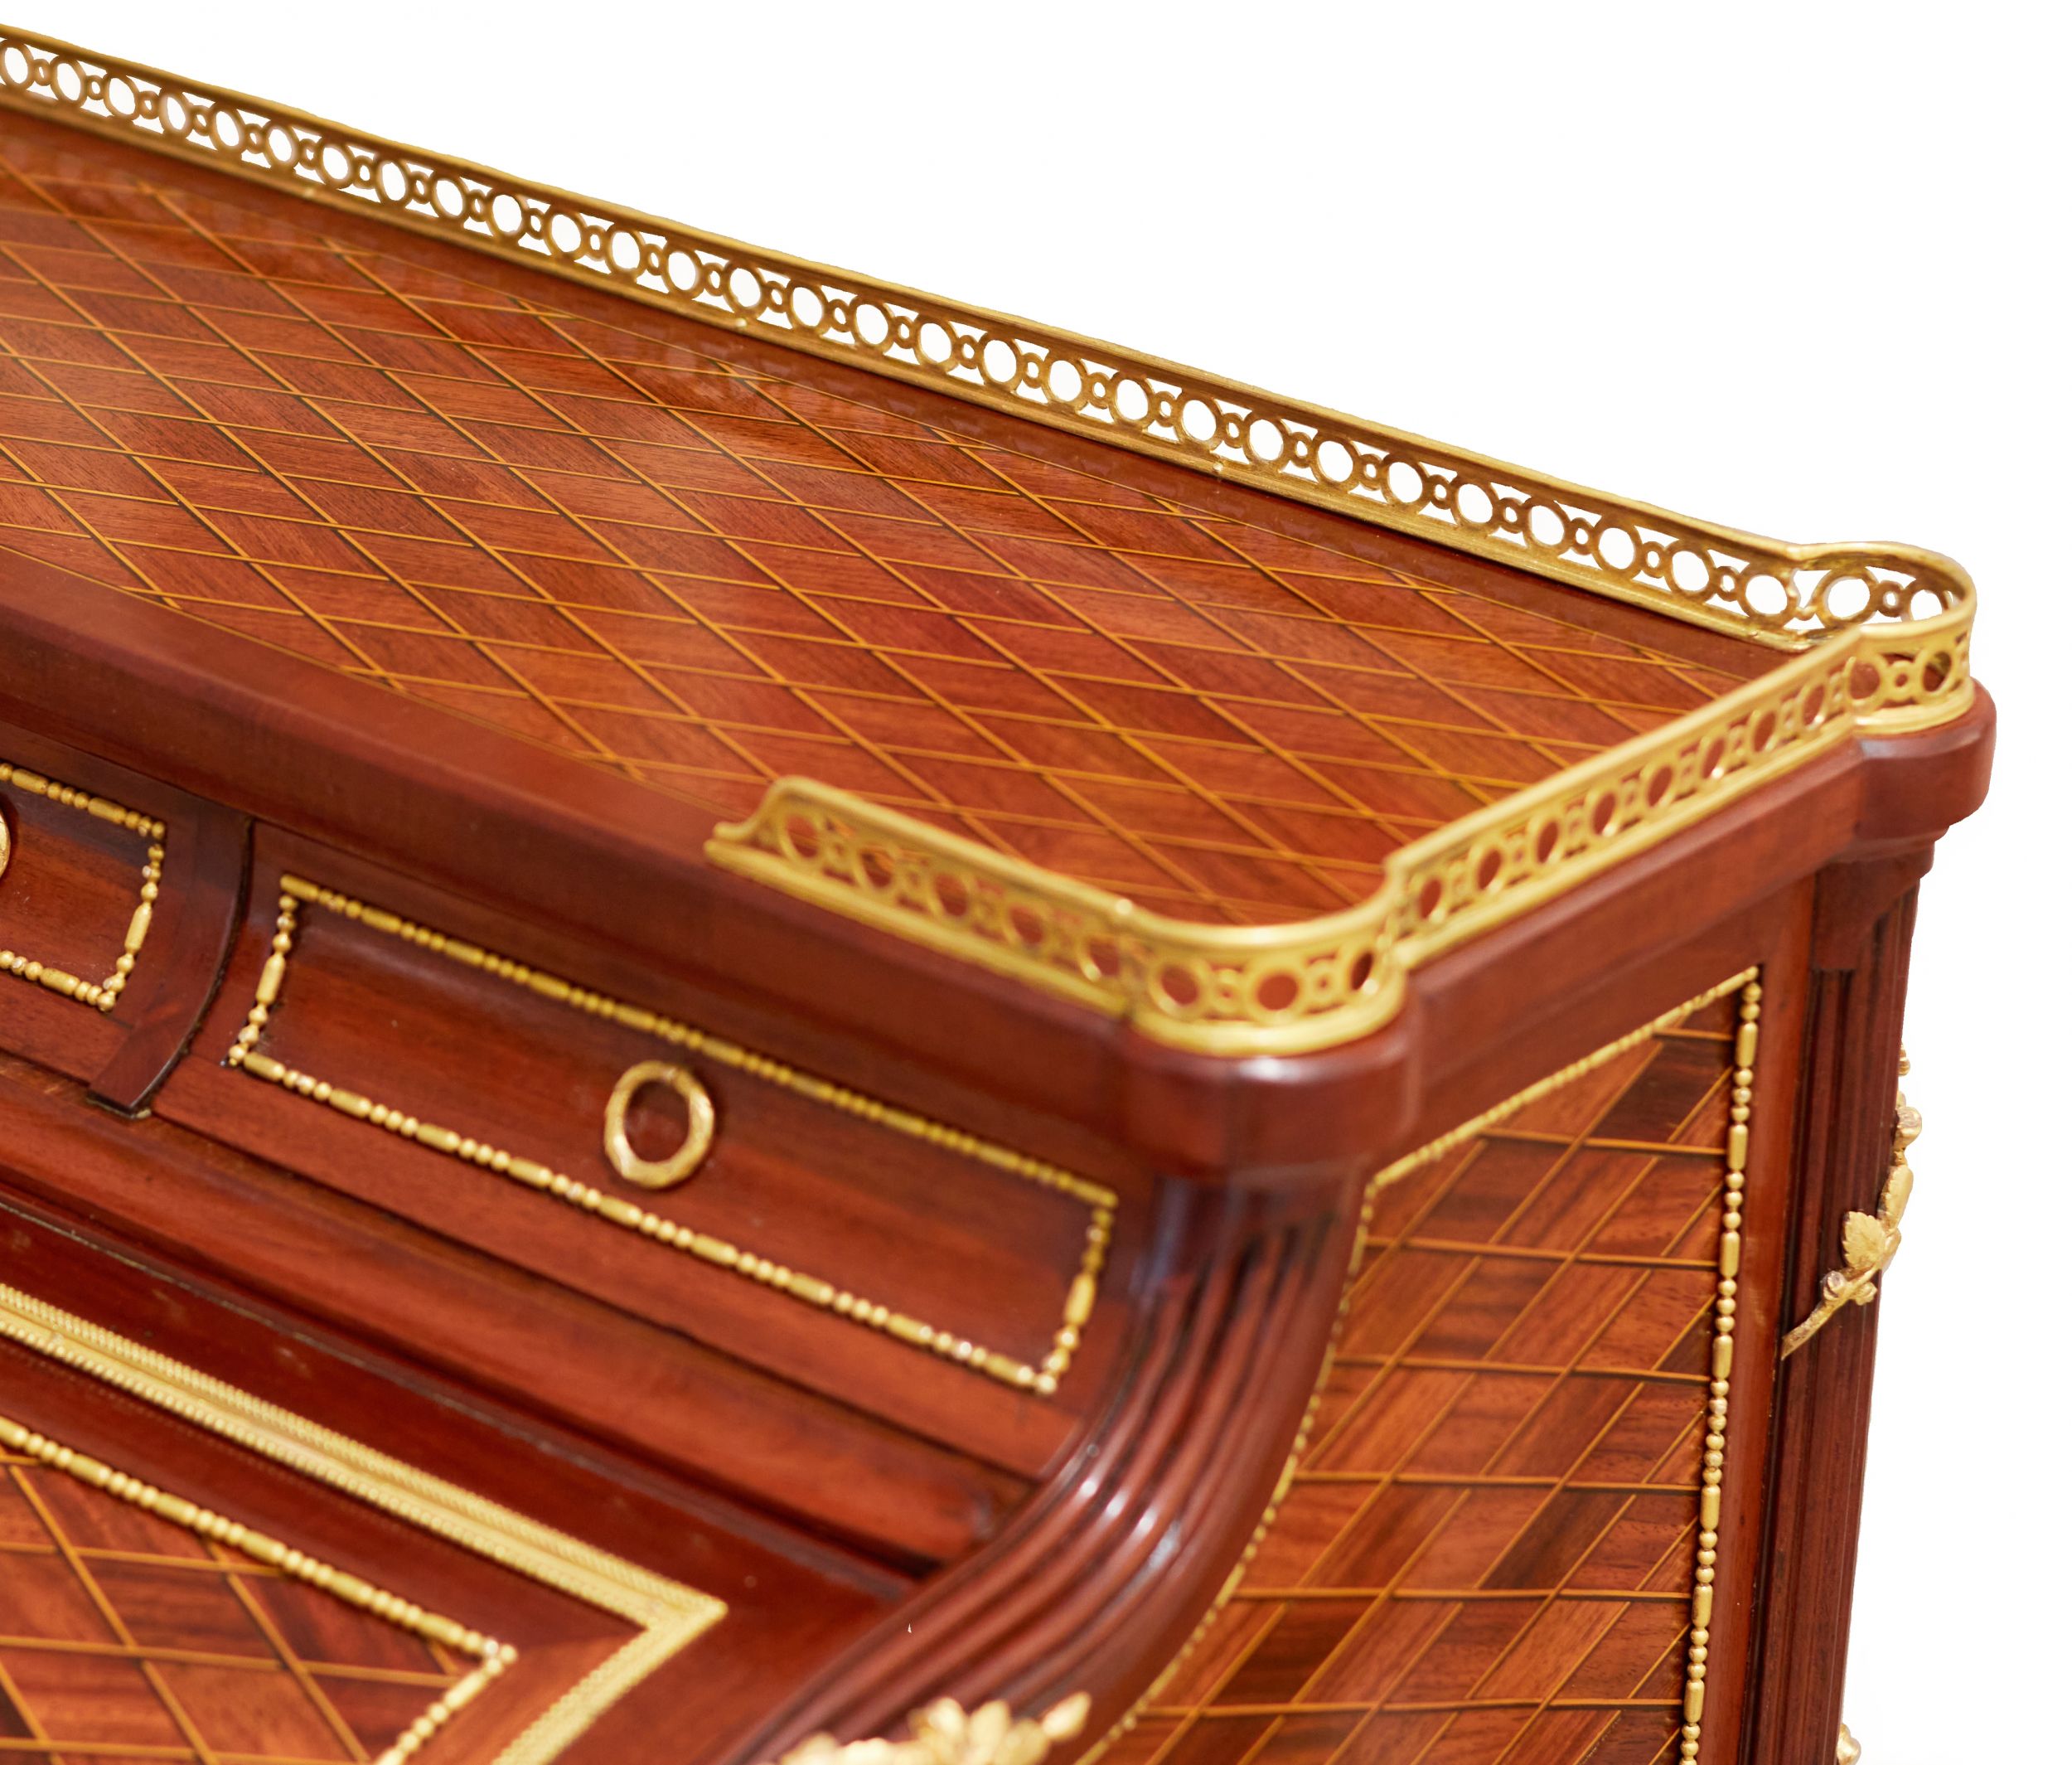 E.KAHN. A magnificent cylindrical bureau in mahogany and satin wood with gilt bronze. - Image 12 of 14